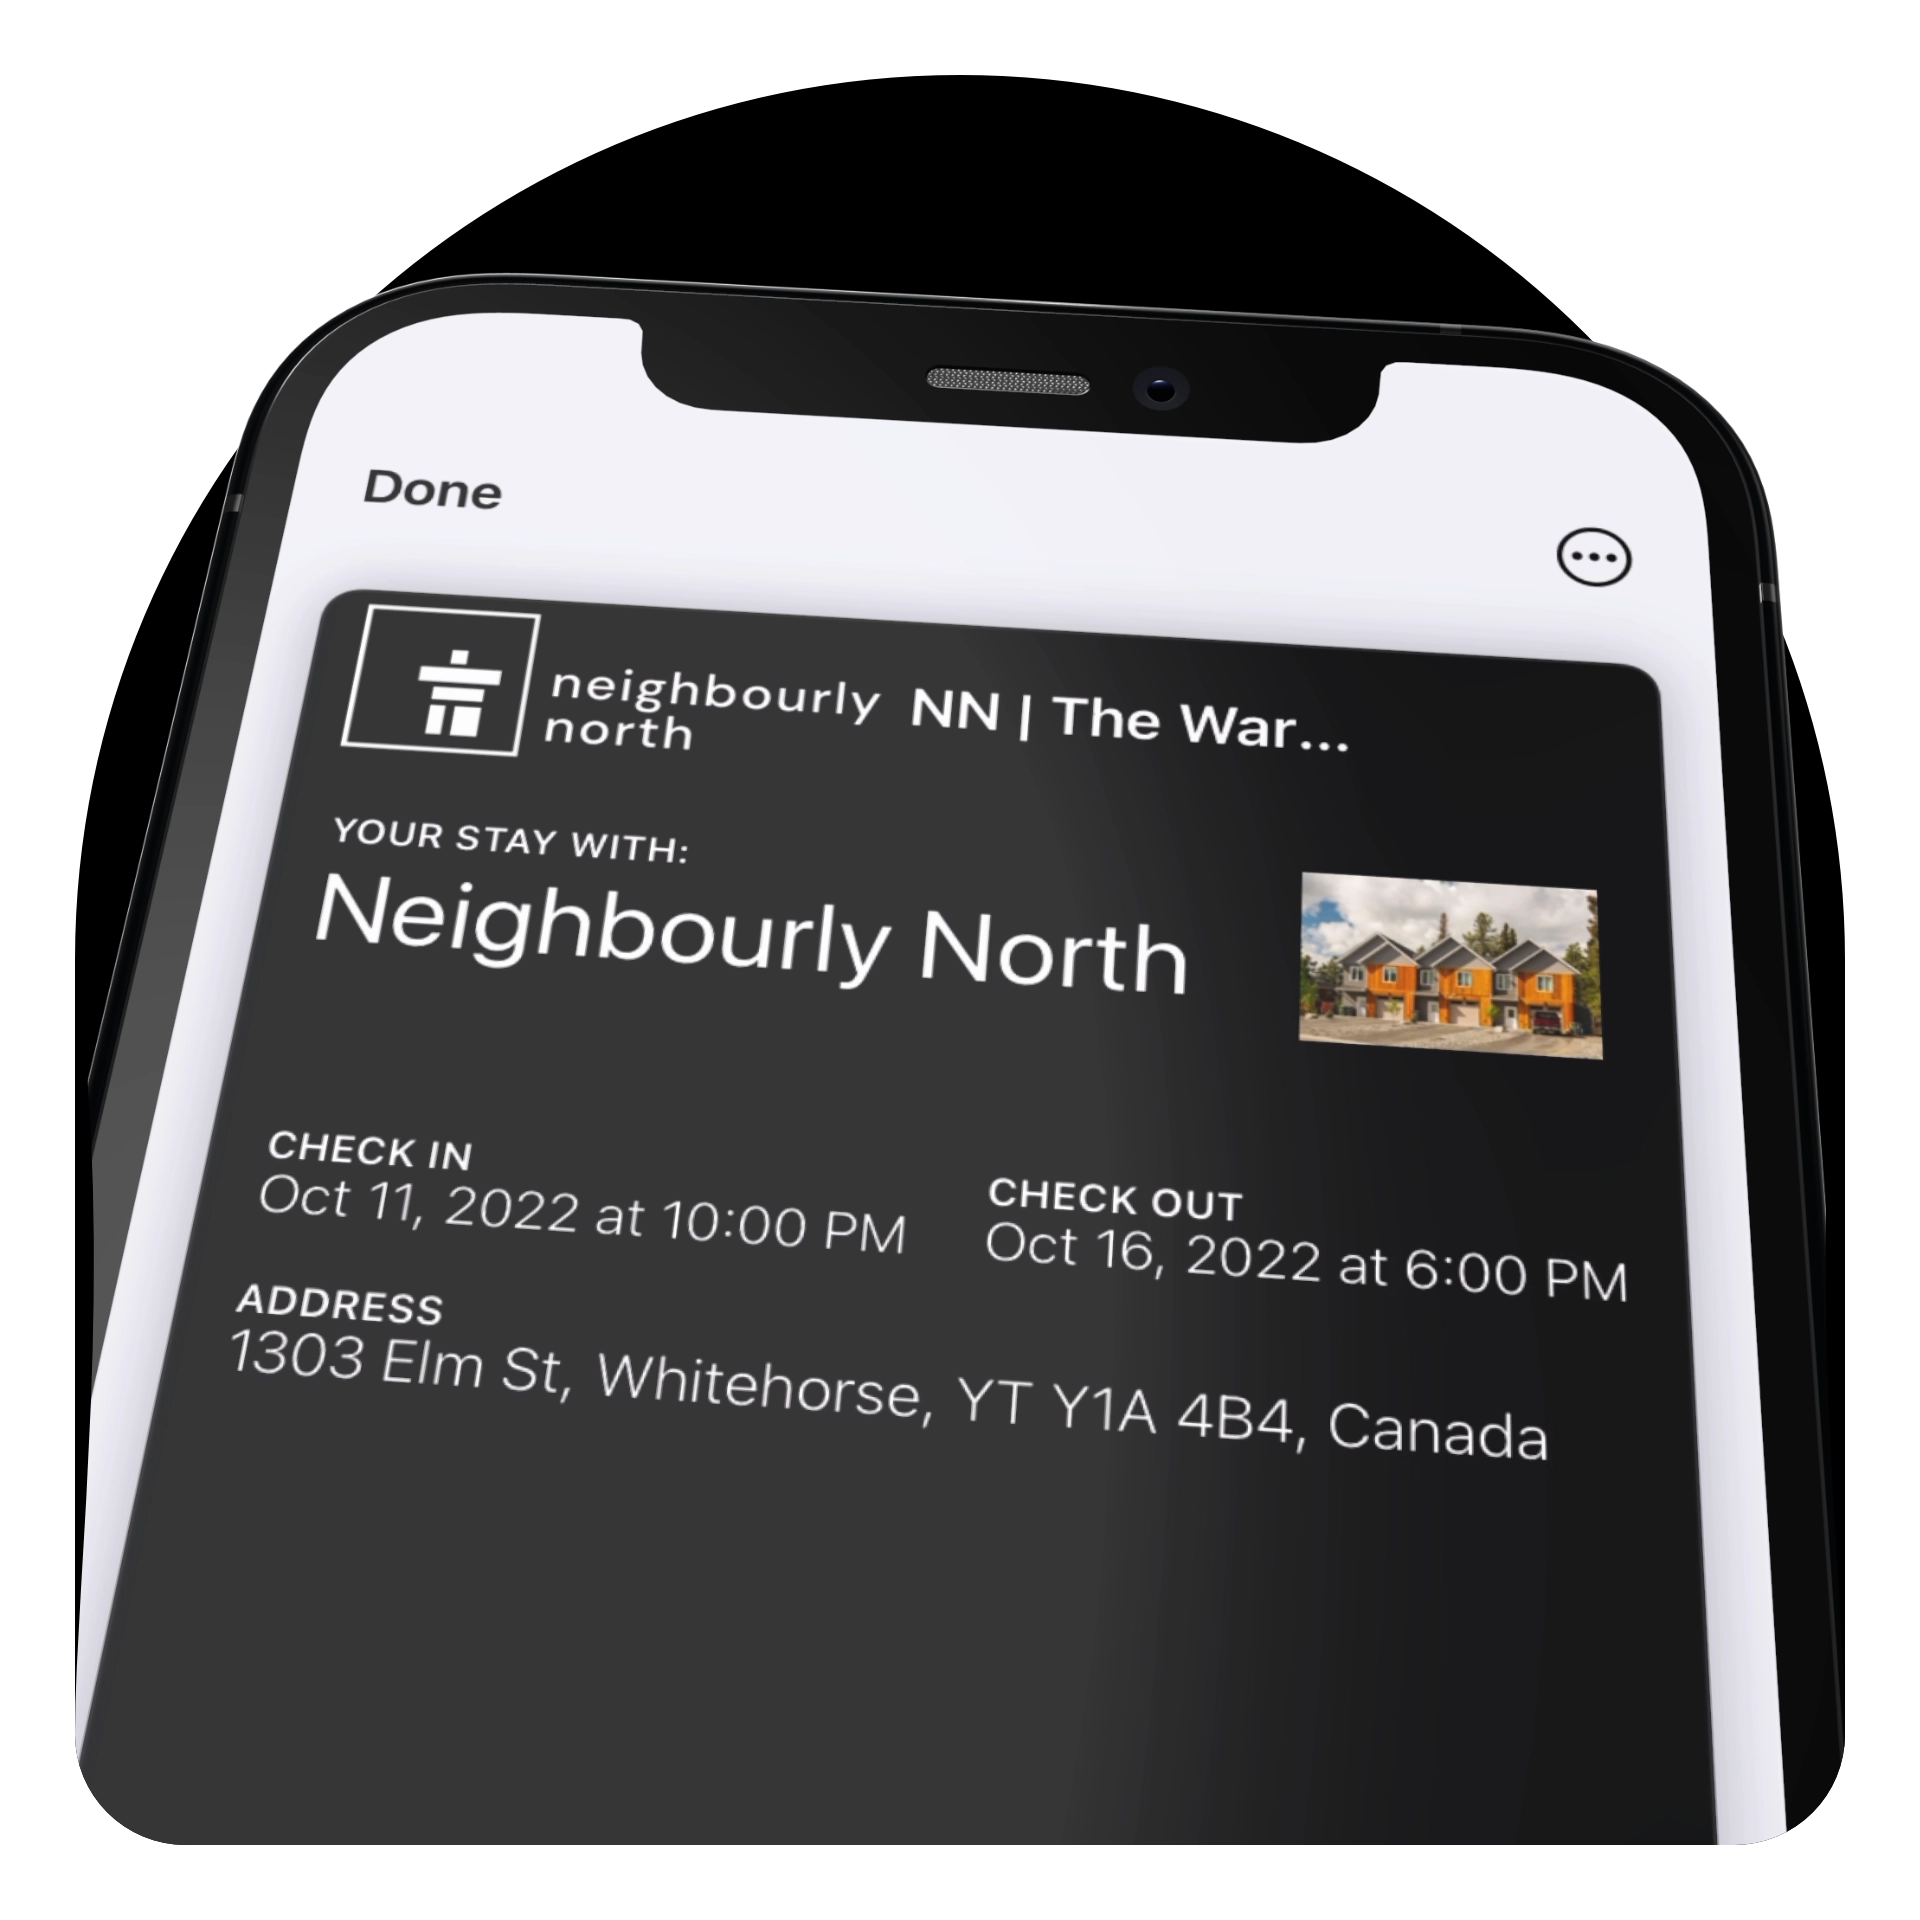 Accommodation details in the guest's Apple wallet